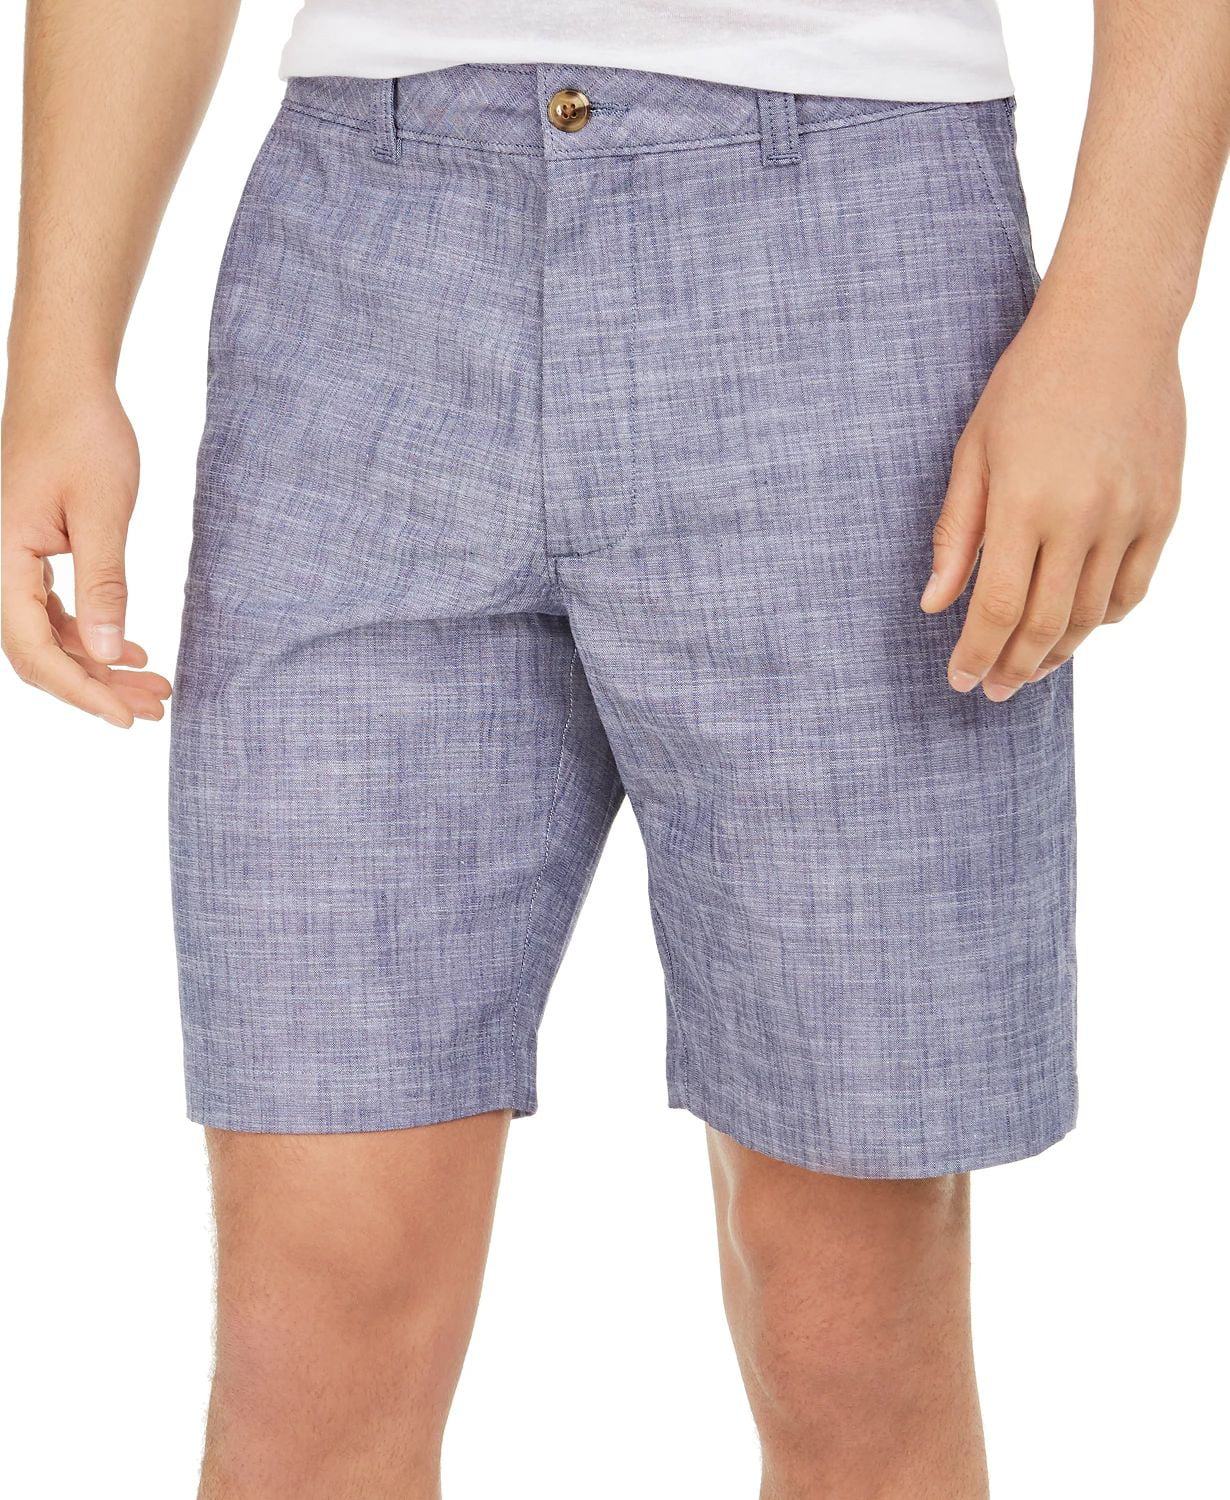 Blue Size 32 NEW CLUB ROOM Men's Classic Chambray Casual Shorts 